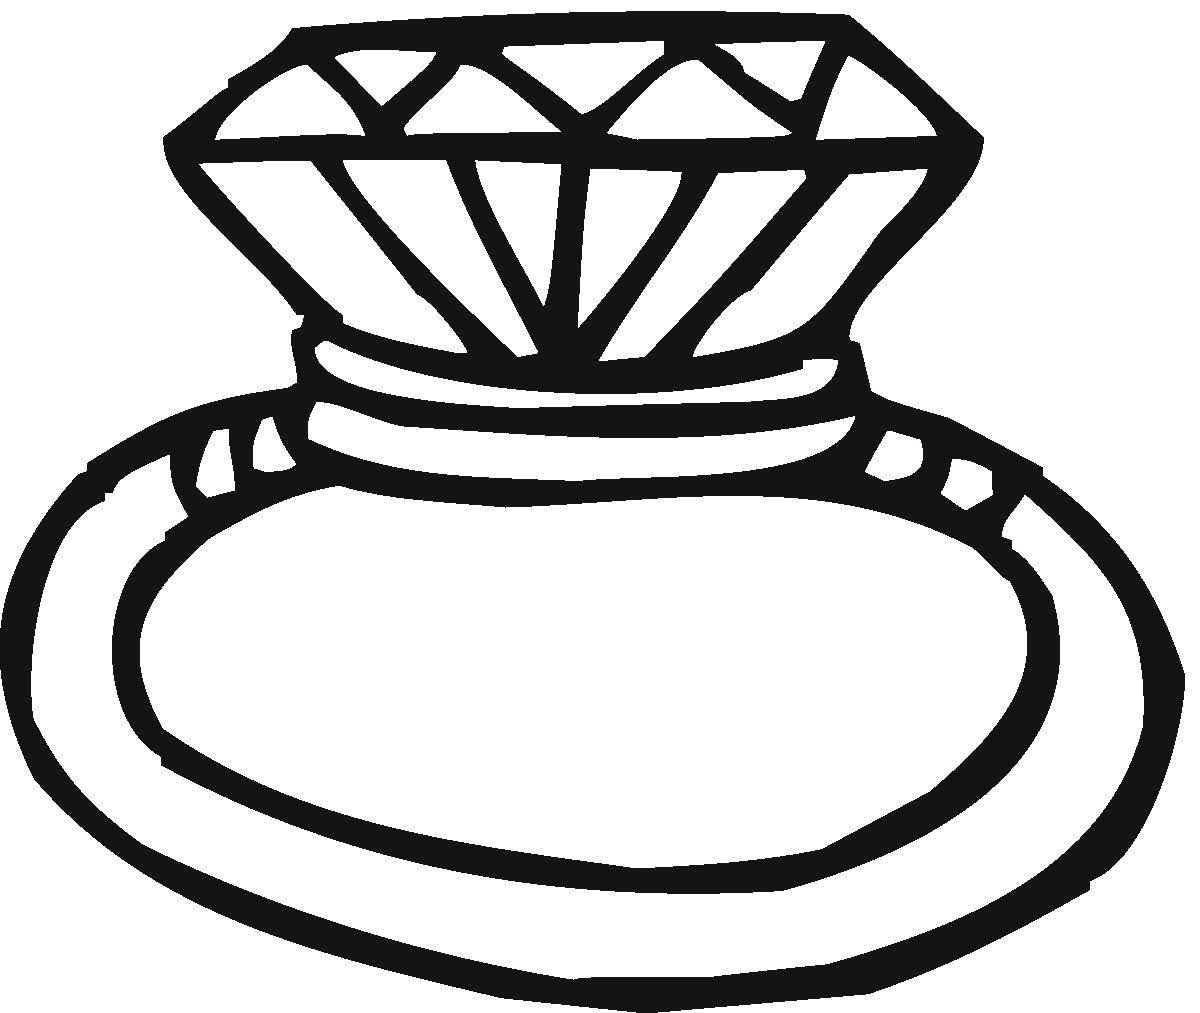 Wedding ring diamond ring clipart free images 4